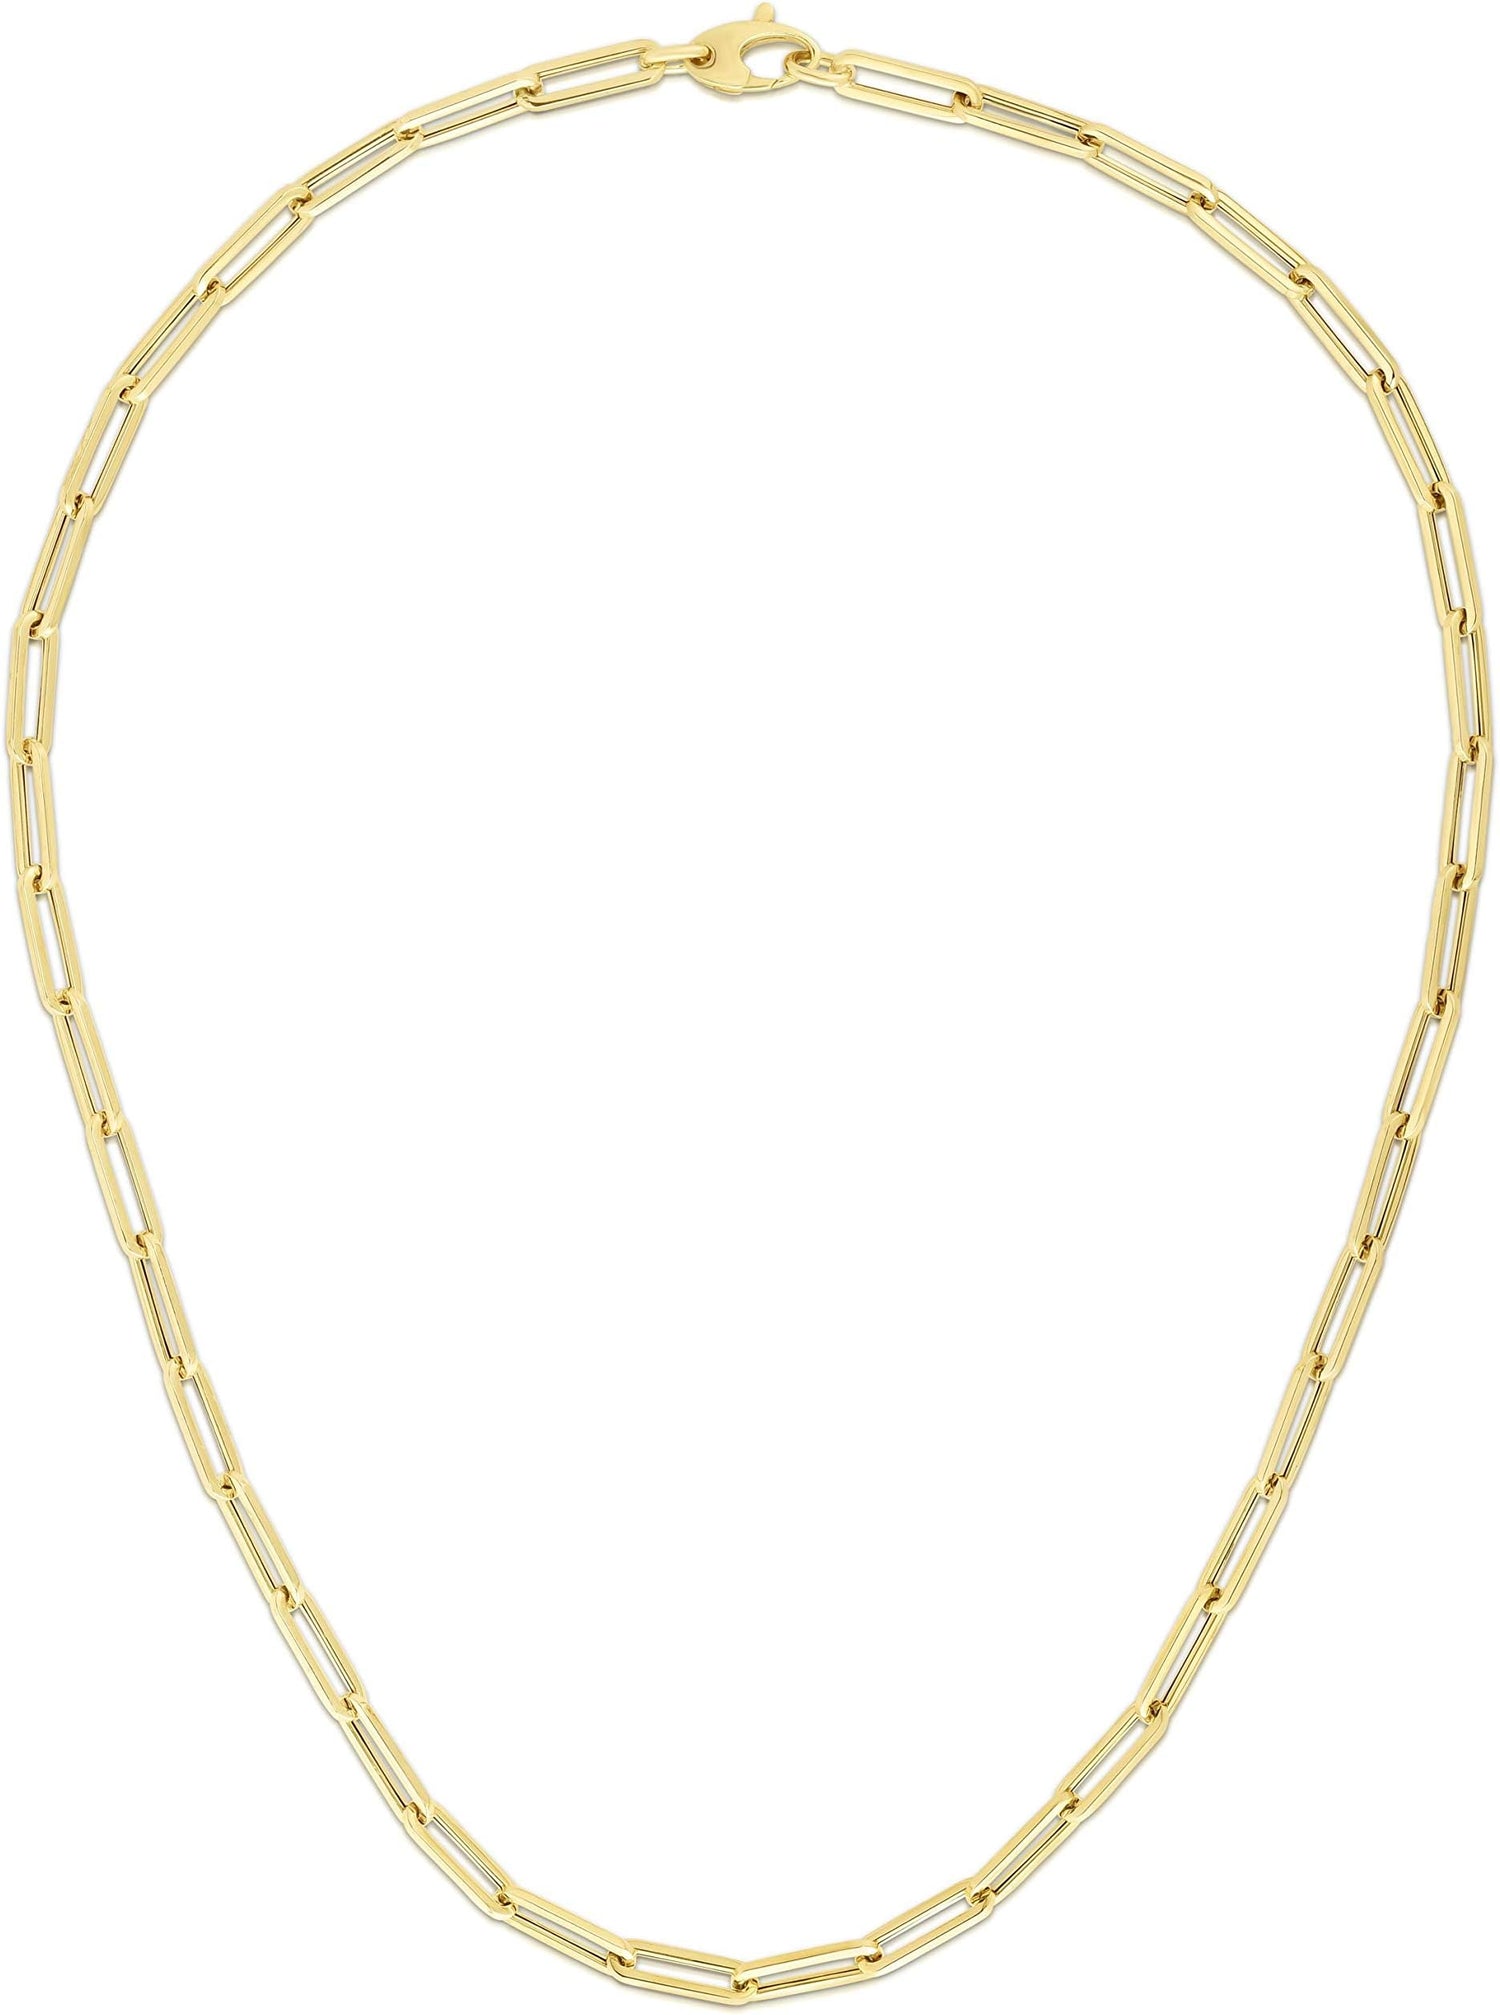 14k Yellow Gold 4.2mm Hollow Paperclip Link Chain Necklace